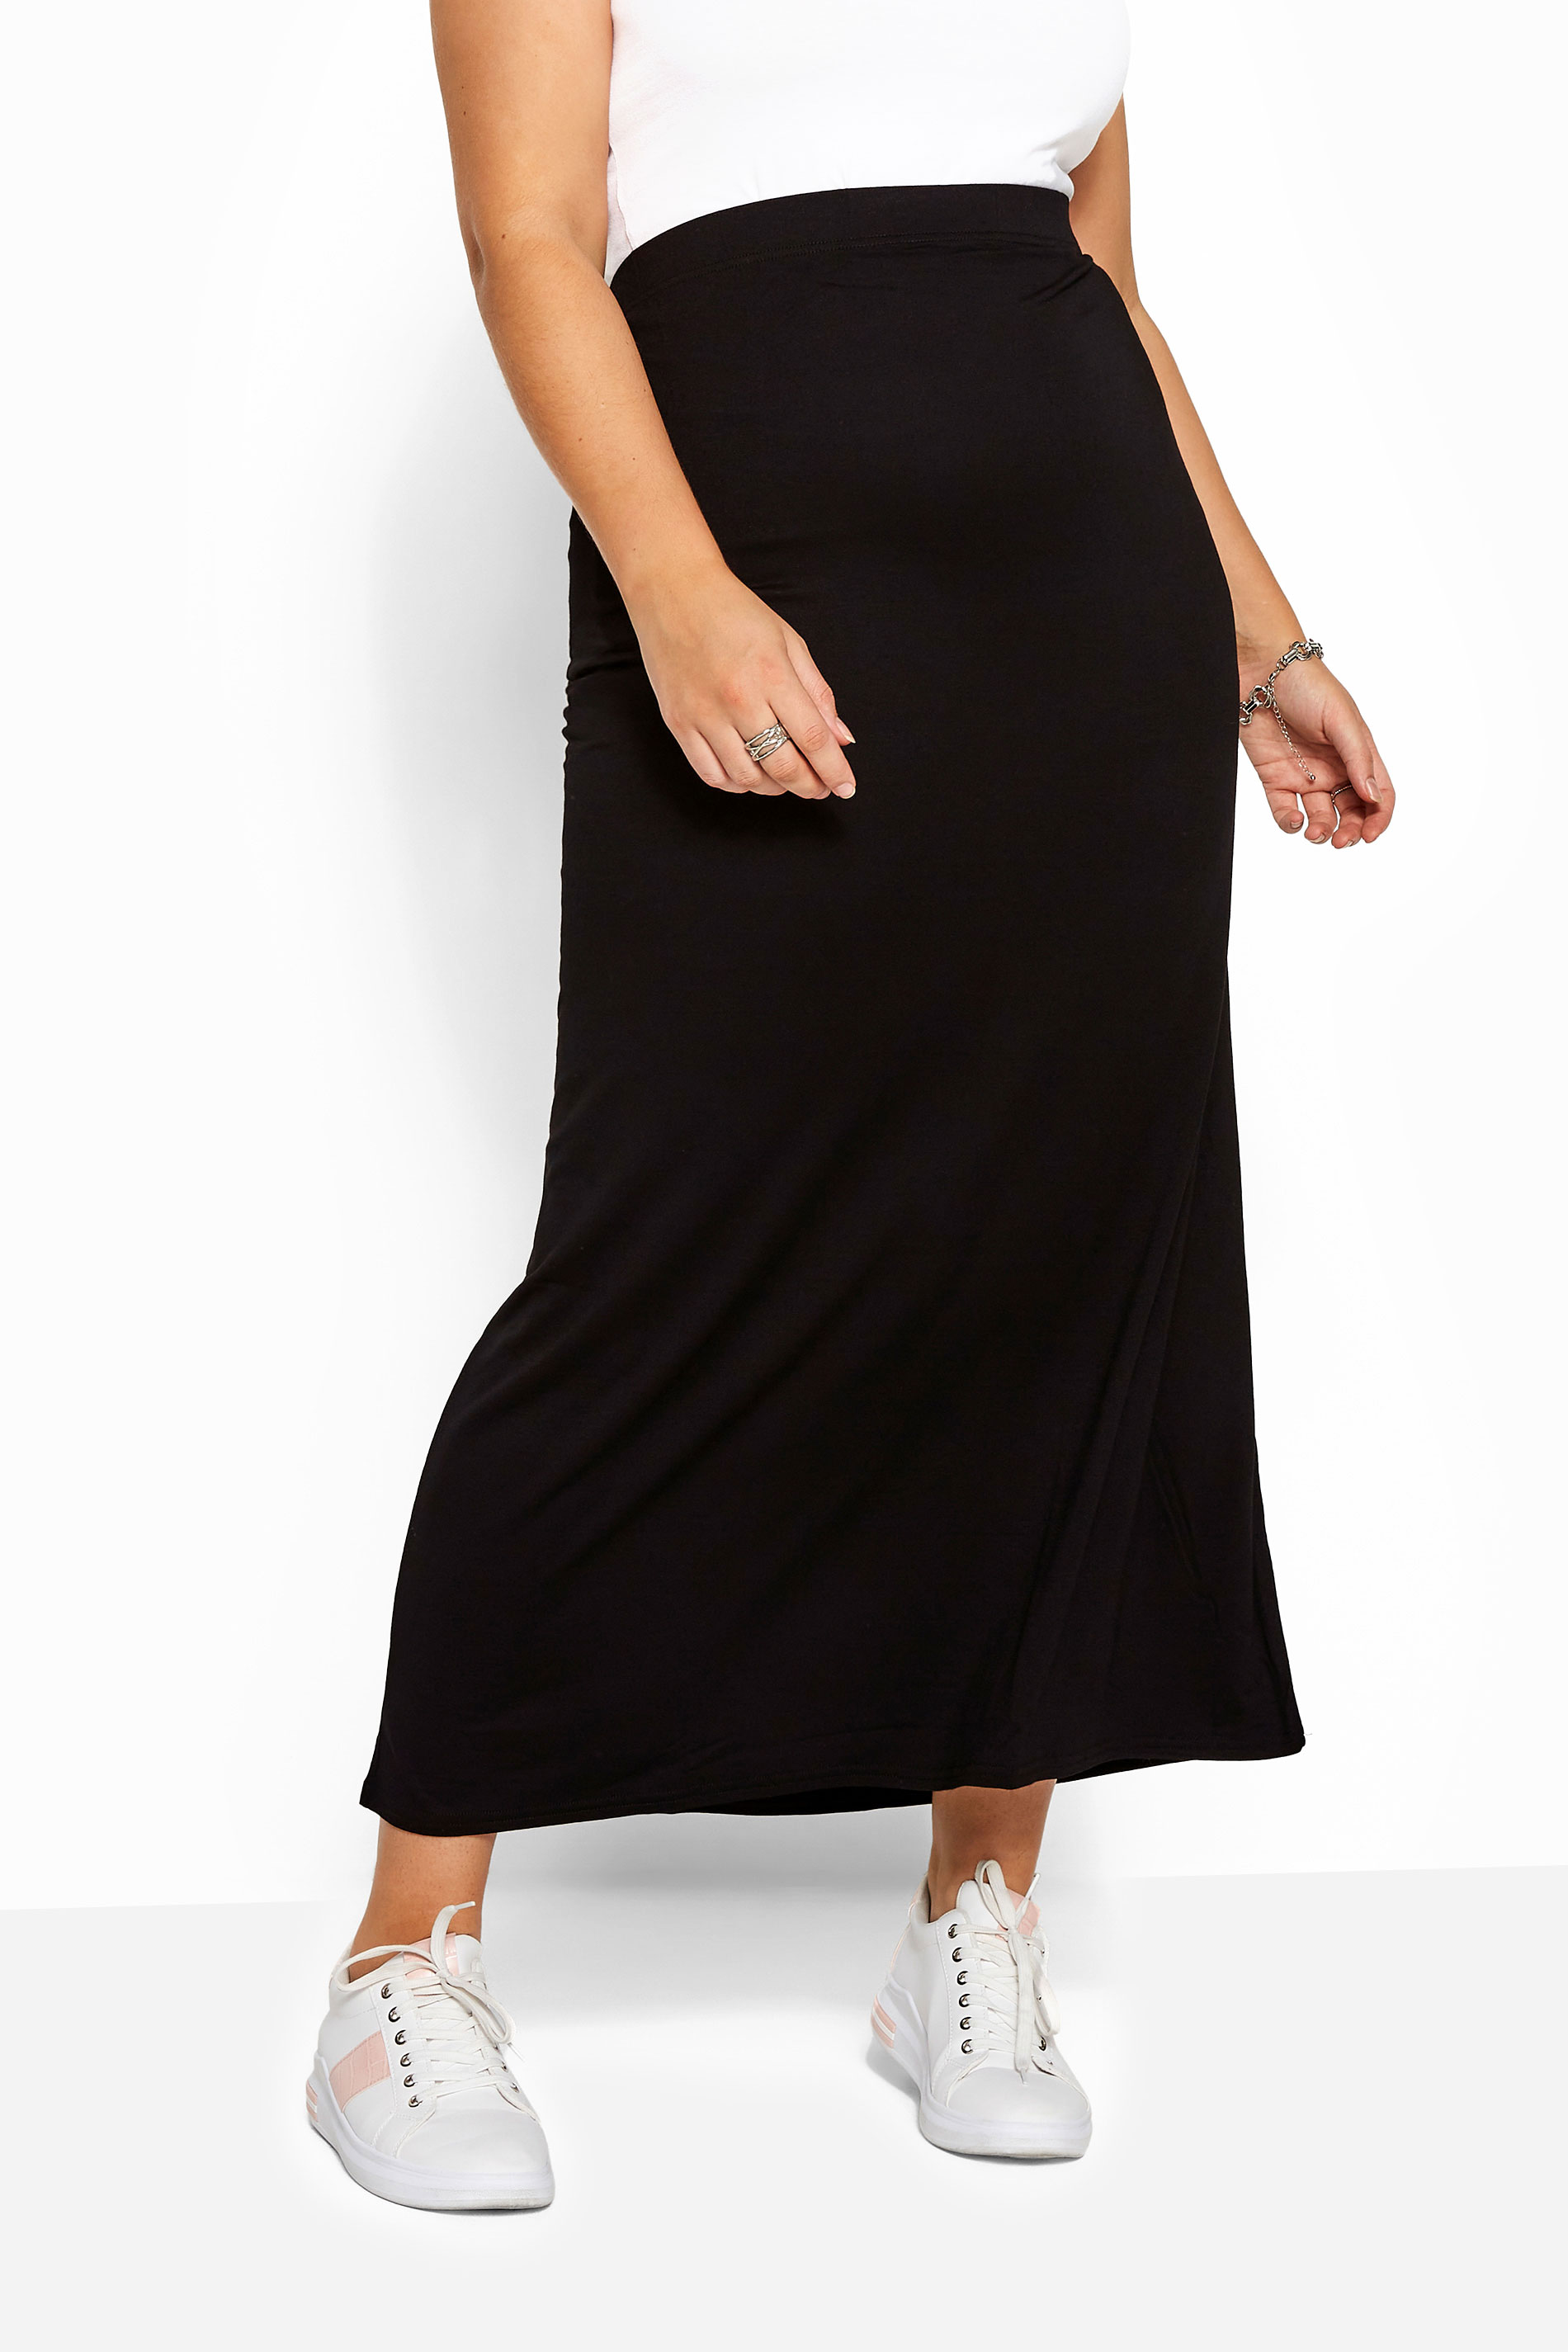 Black Jersey Stretch Maxi Tube Skirt With Elasticated Waistband plus size 16 to 36 1